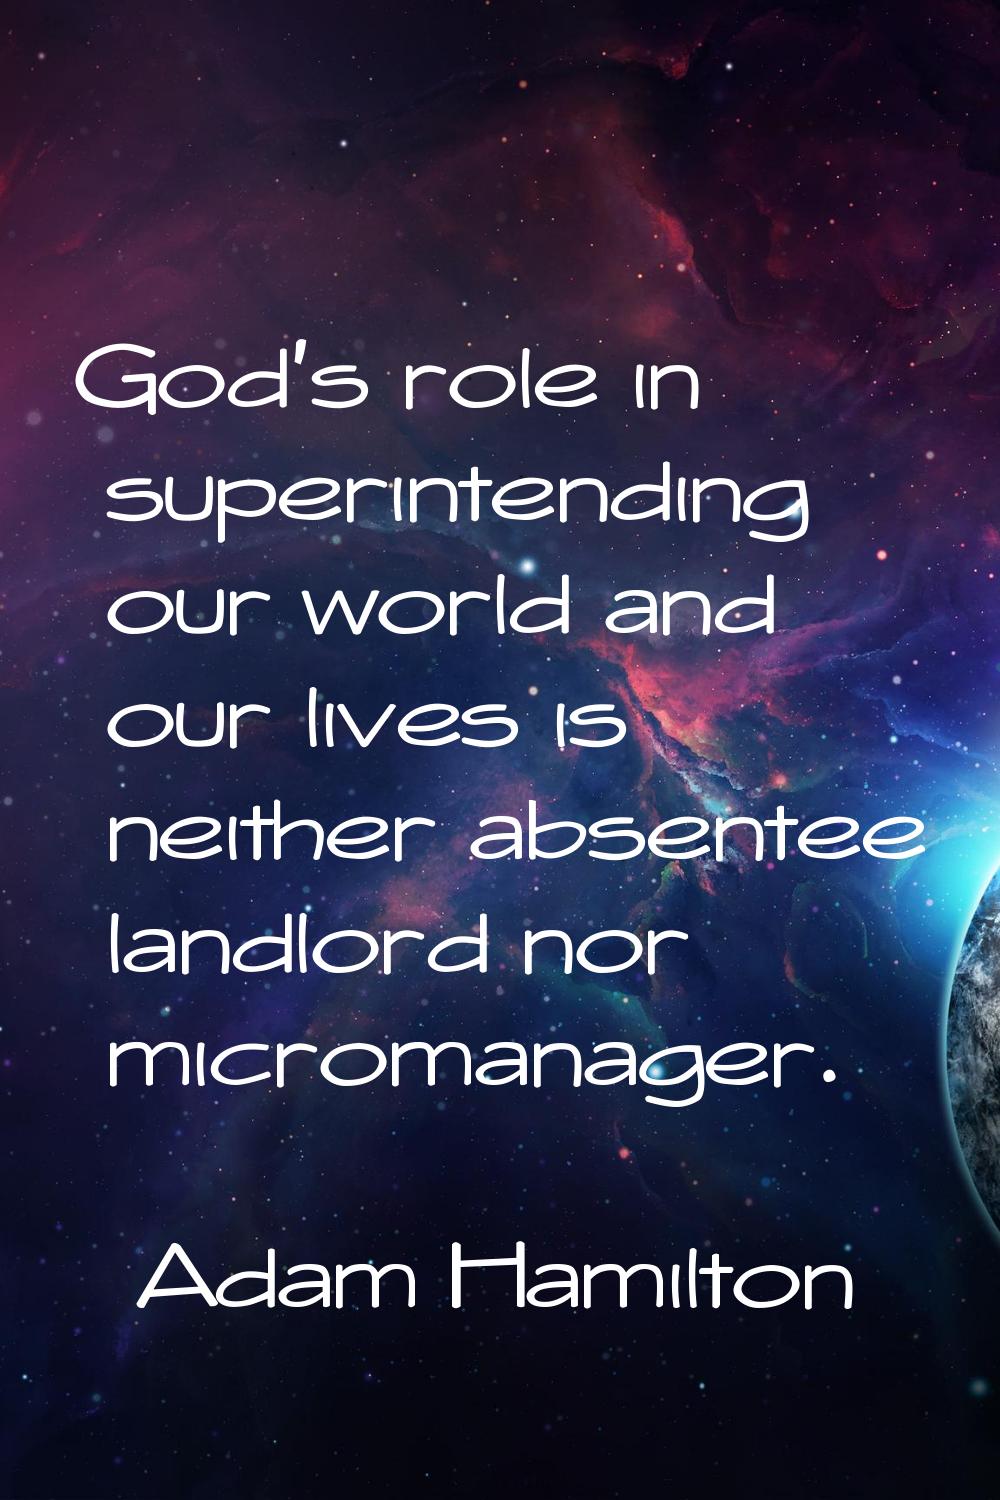 God's role in superintending our world and our lives is neither absentee landlord nor micromanager.